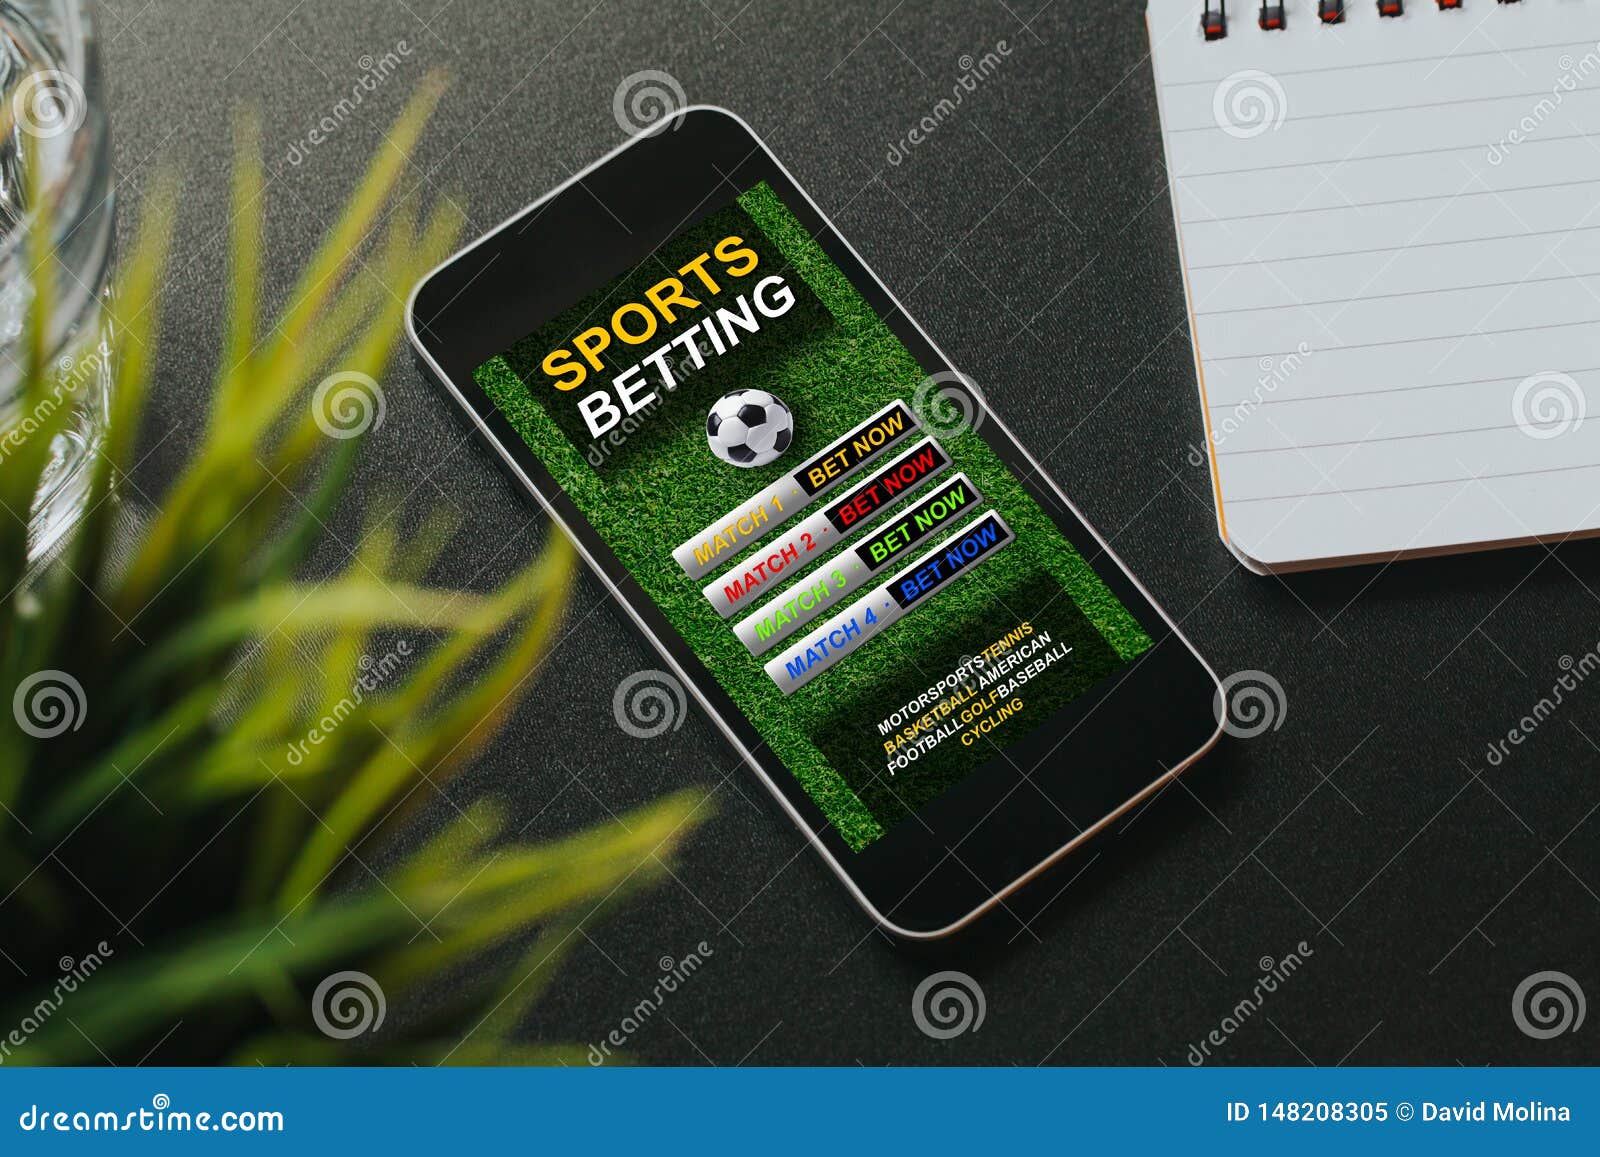 37 Top Pictures Dc Sports Betting Apps / The best footie via sports apps | Anfield Index